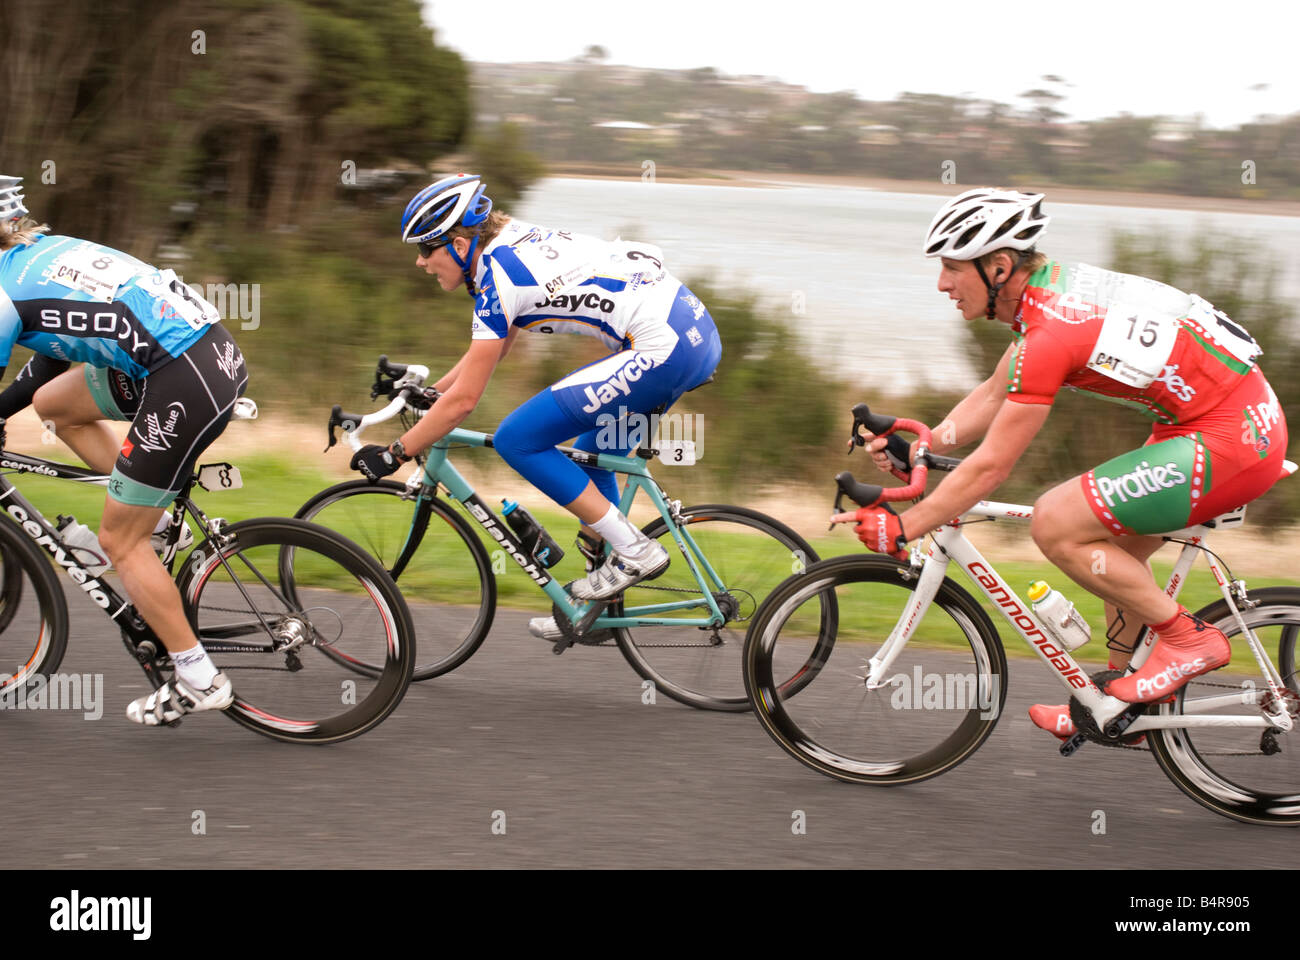 Competitors in the 2008 Tour of Tasmania during the Ulverstone Criterium stage Stock Photo